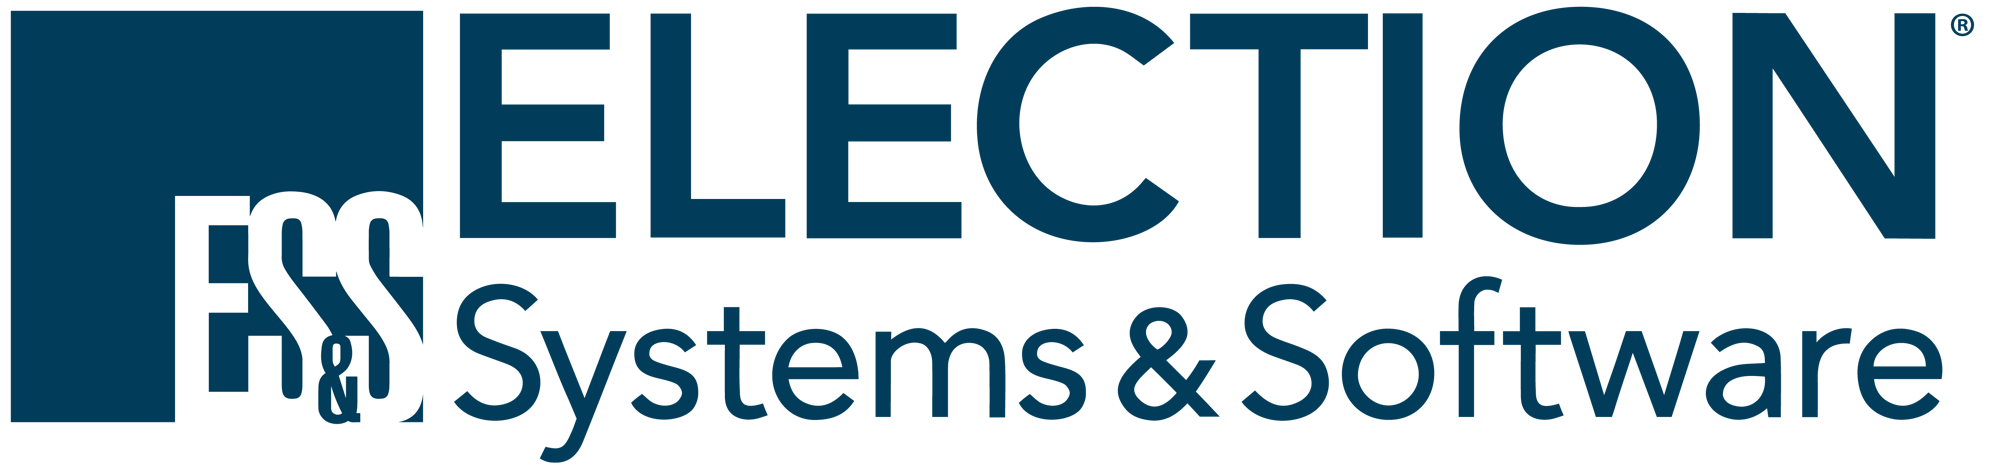 Election Systems and Software logo-01